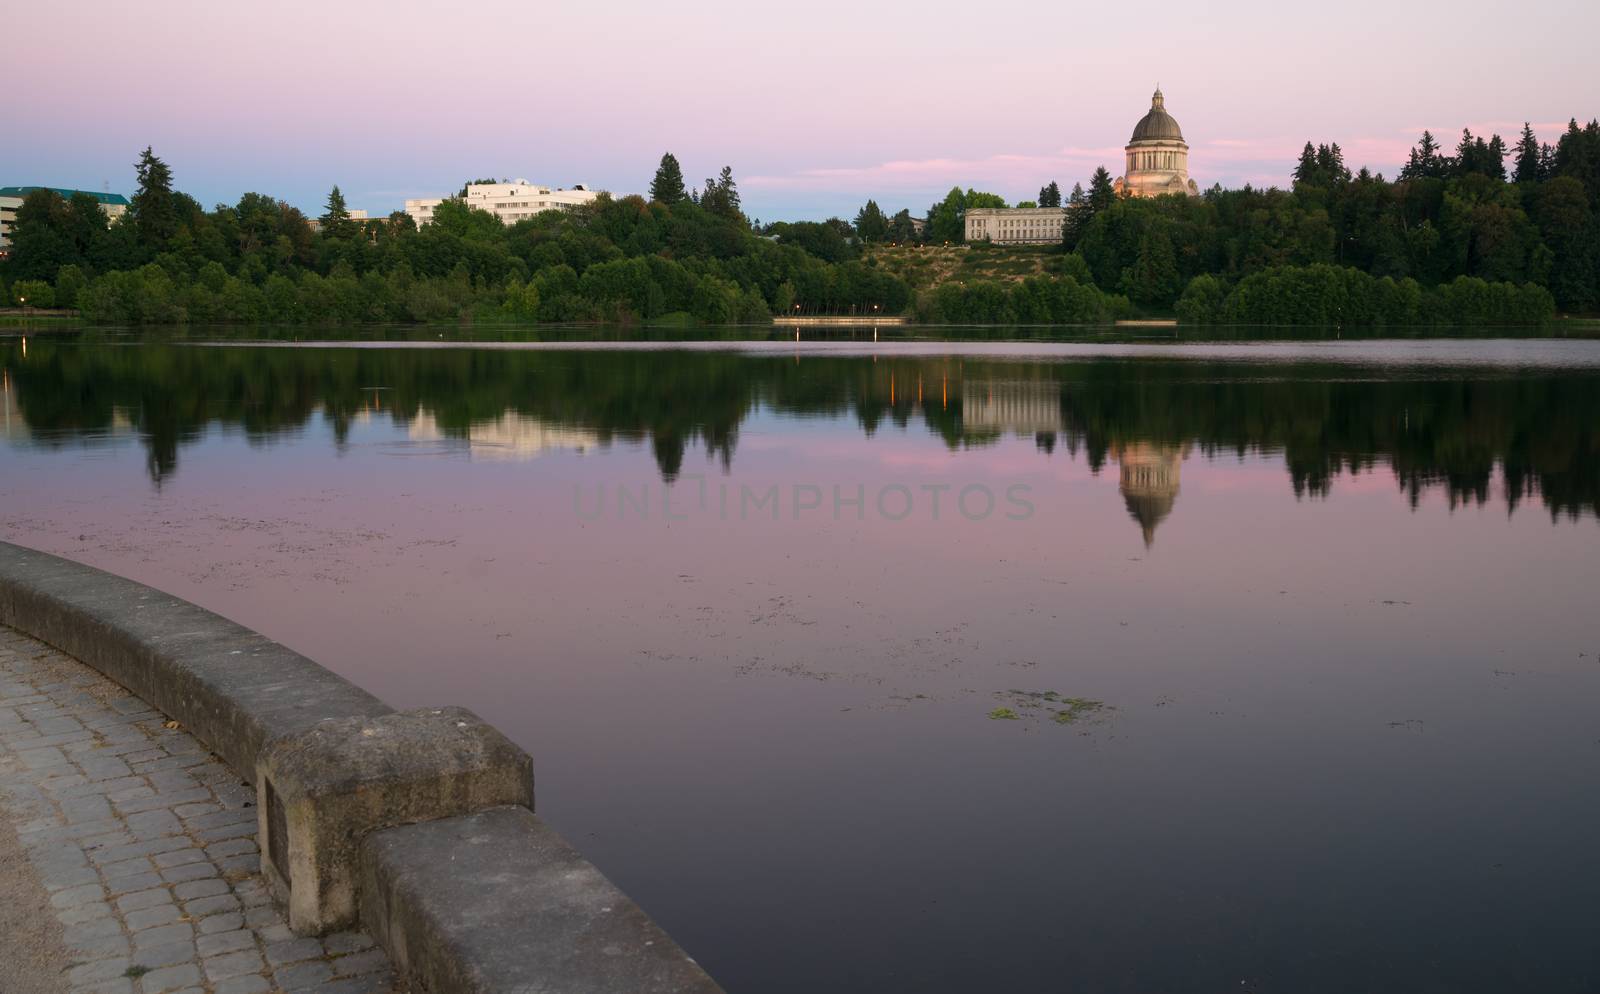 Government Building Capital Lake Olympia Washington Sunset Dusk by ChrisBoswell